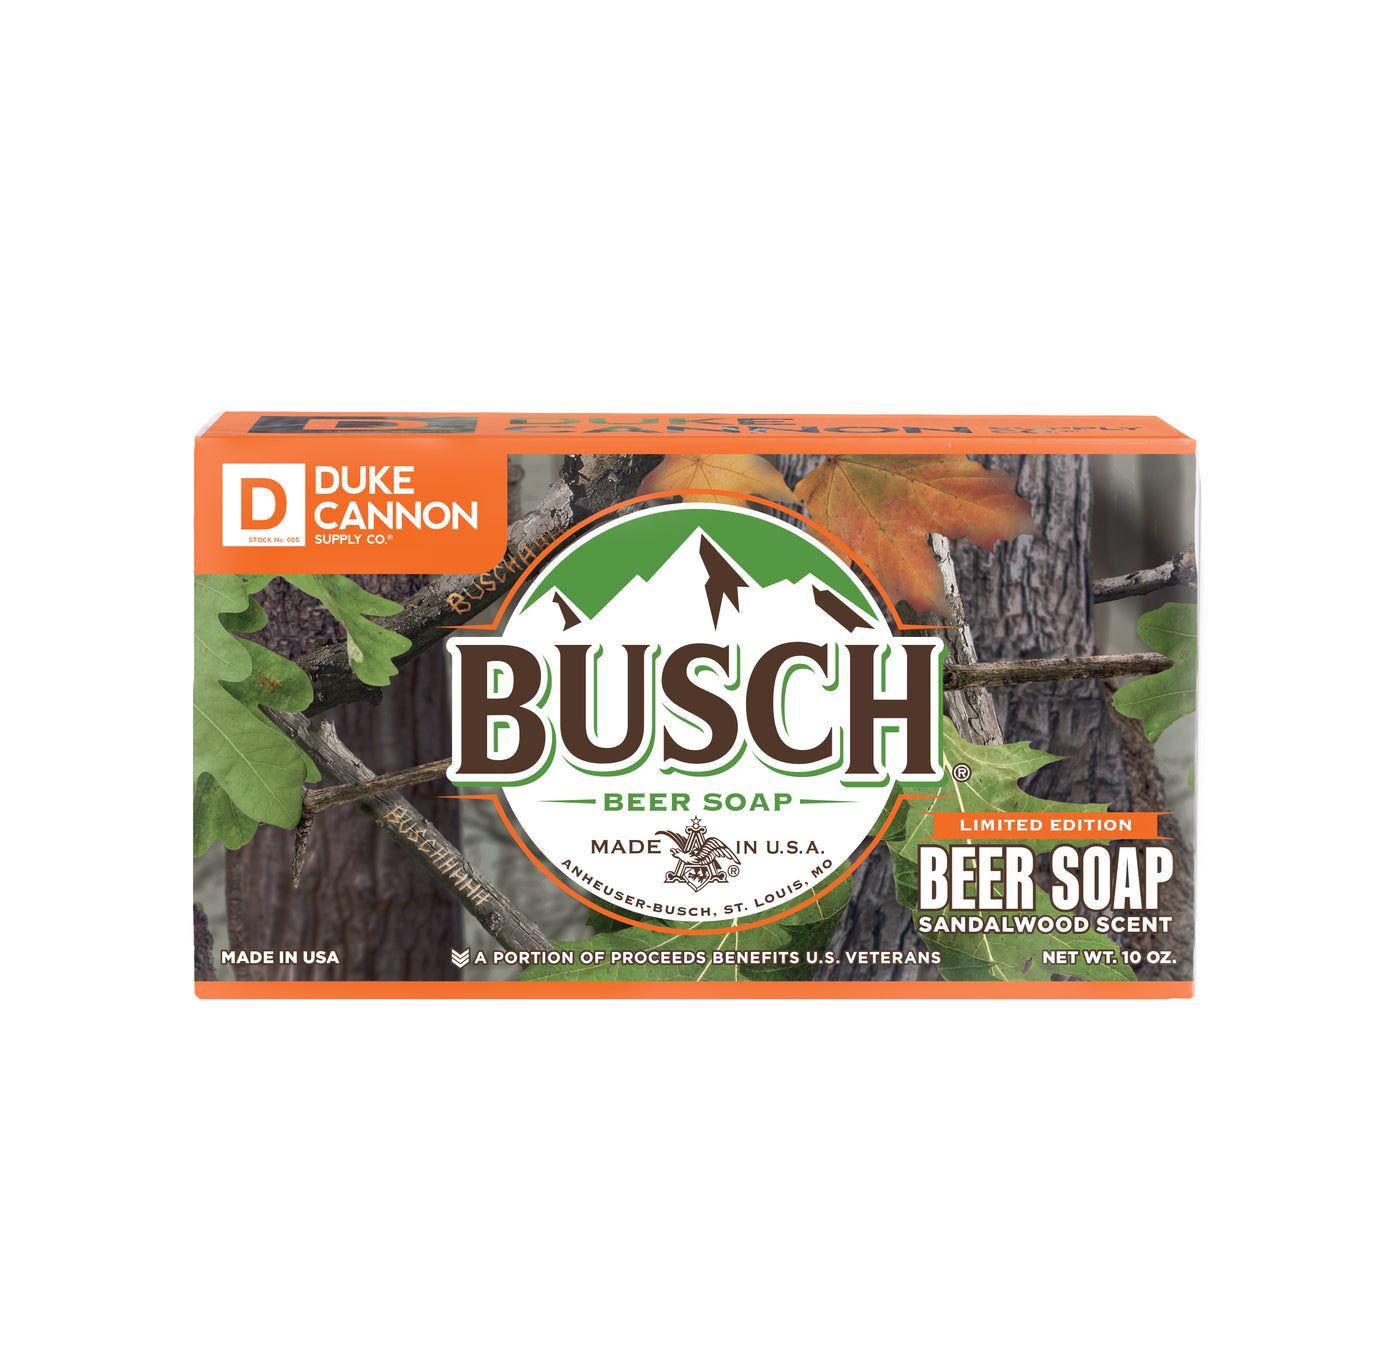 Busch Beer Soap - Special Hunting Edition